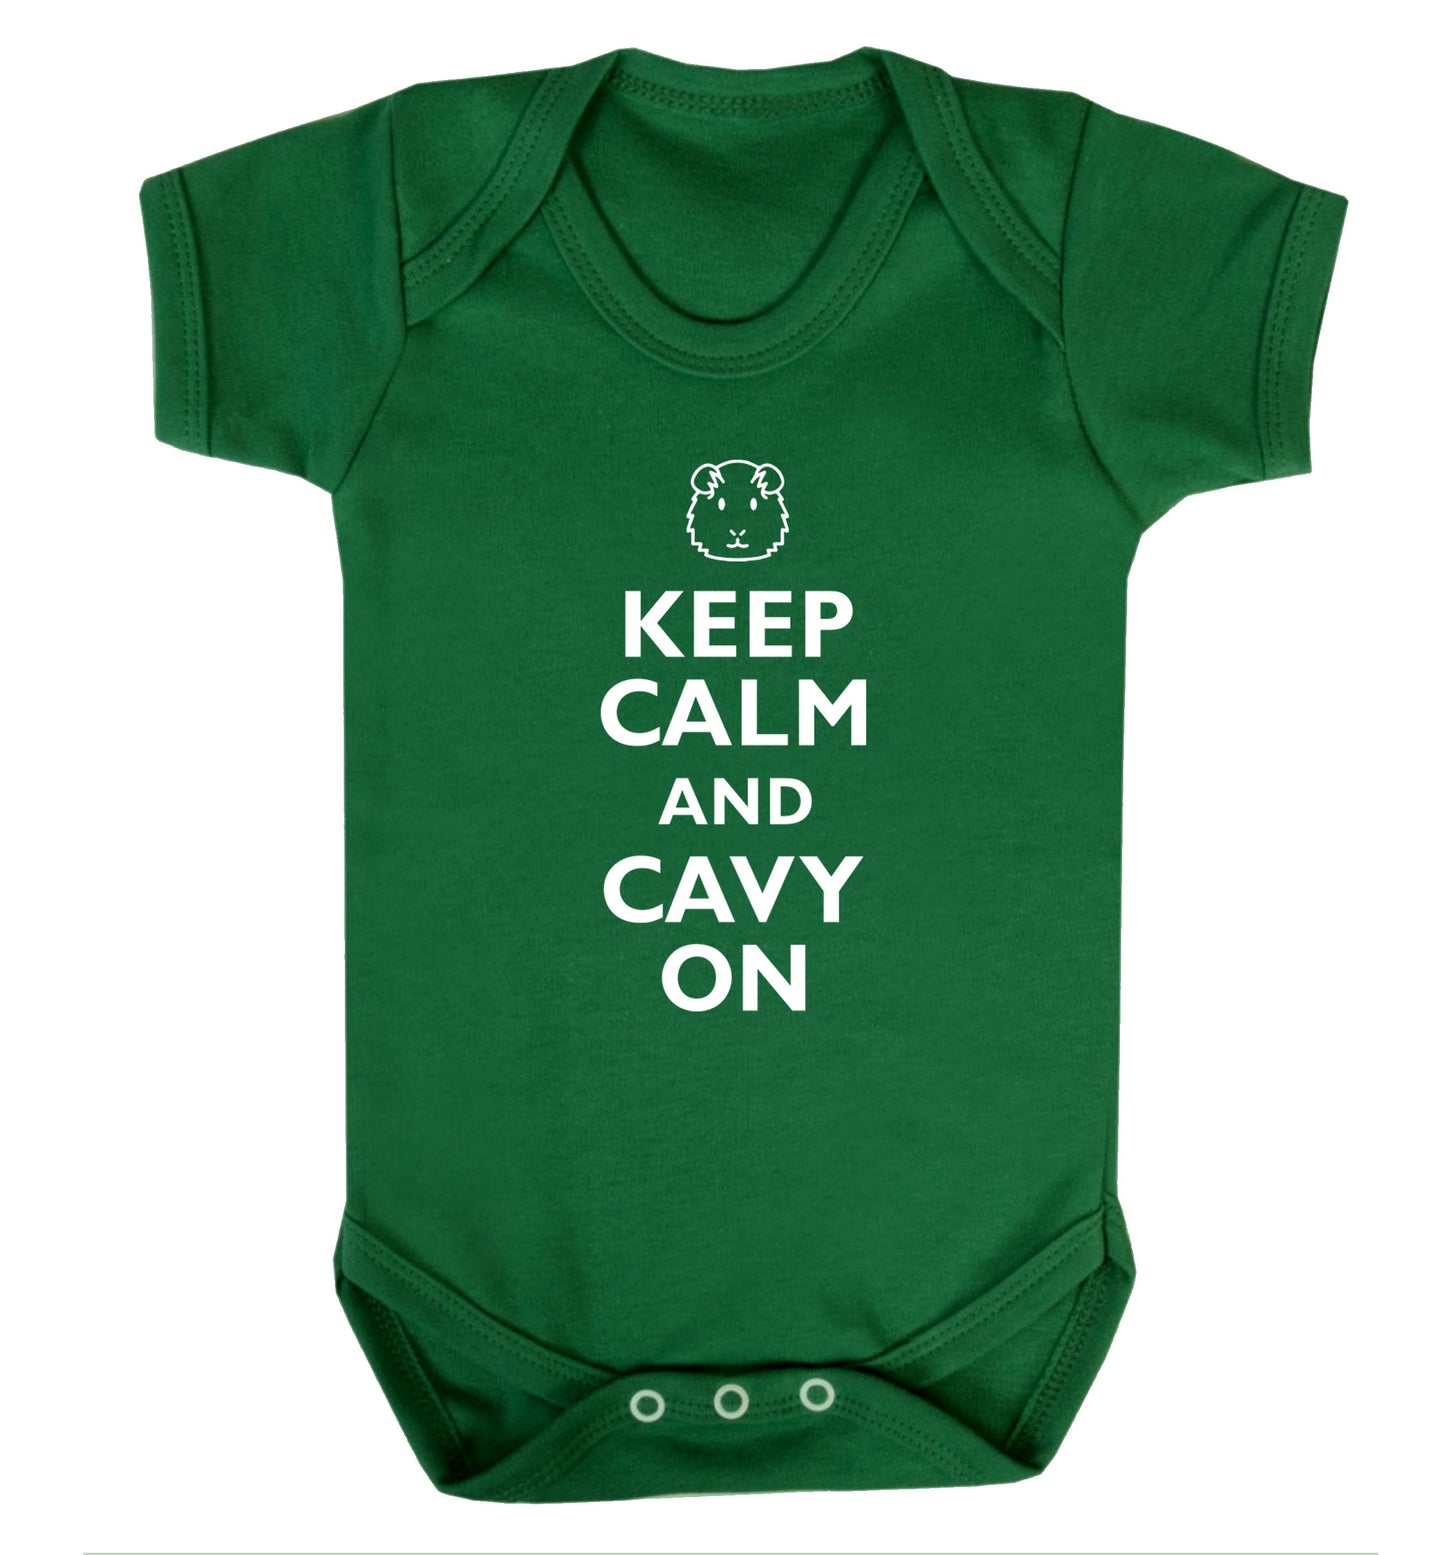 Keep calm and cavvy on Baby Vest green 18-24 months